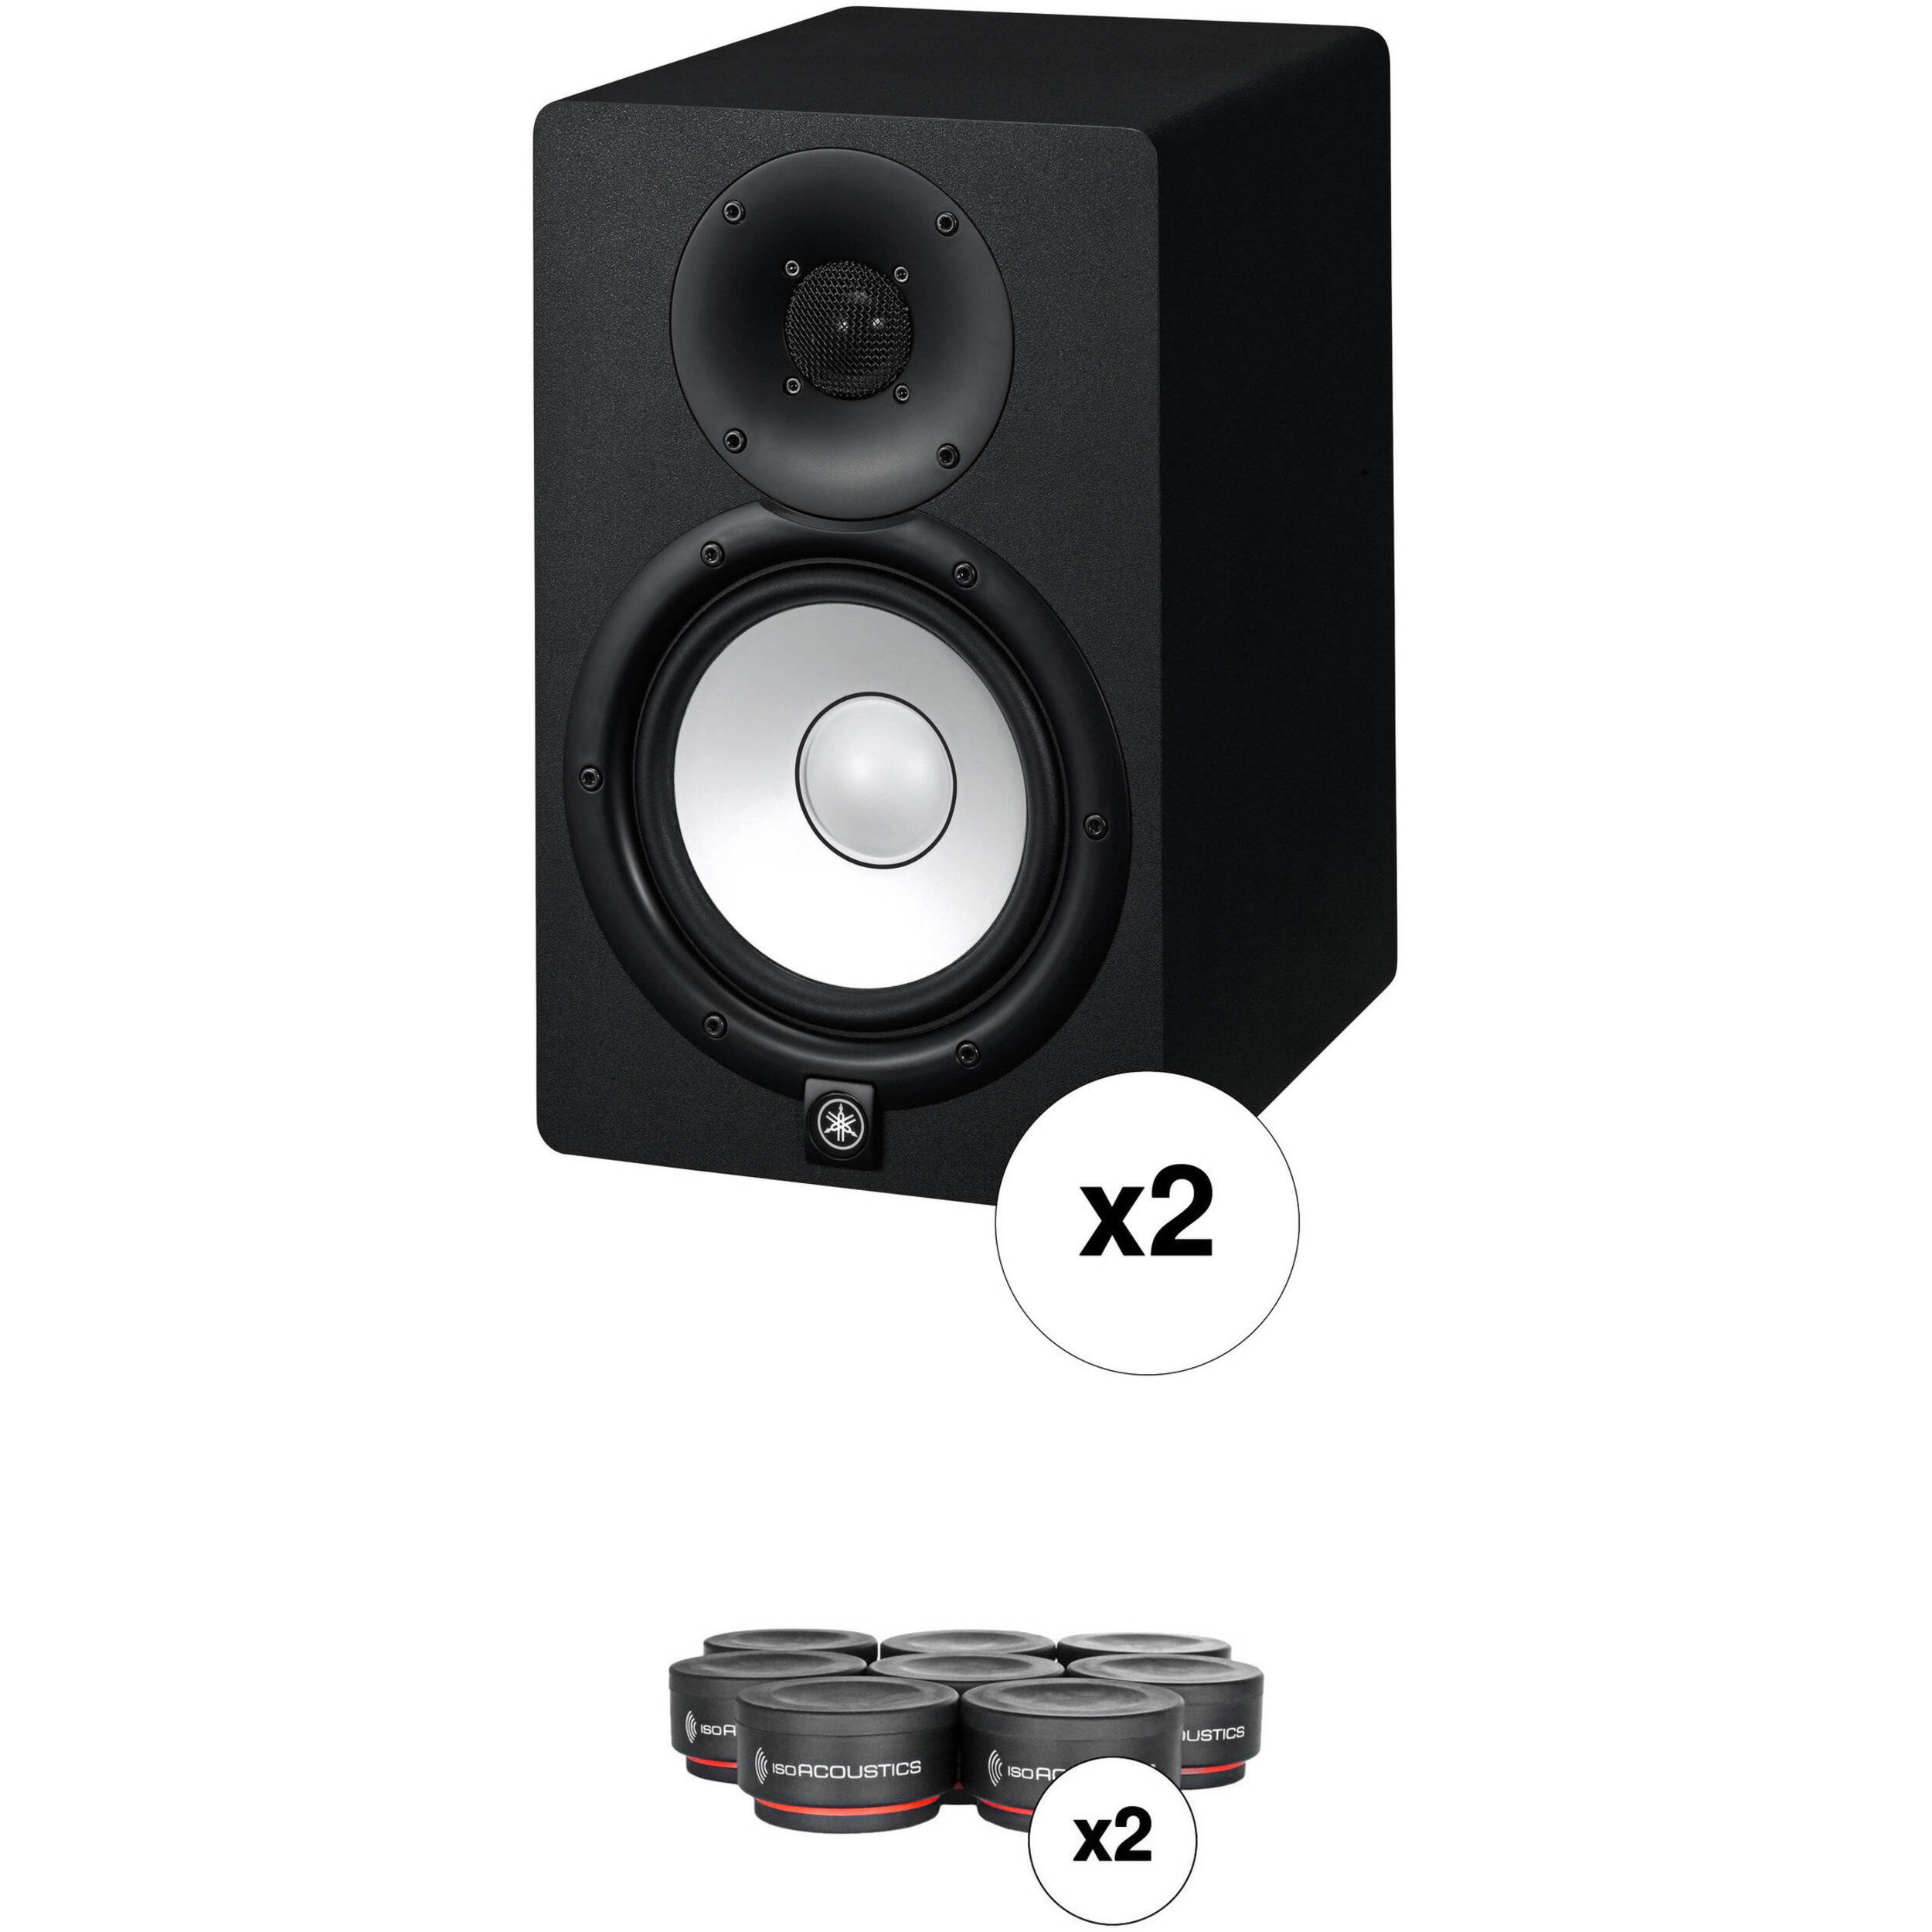 Yamaha Hs7 Powered Studio Monitors With Monitor Controller And Isolation Pads Kit